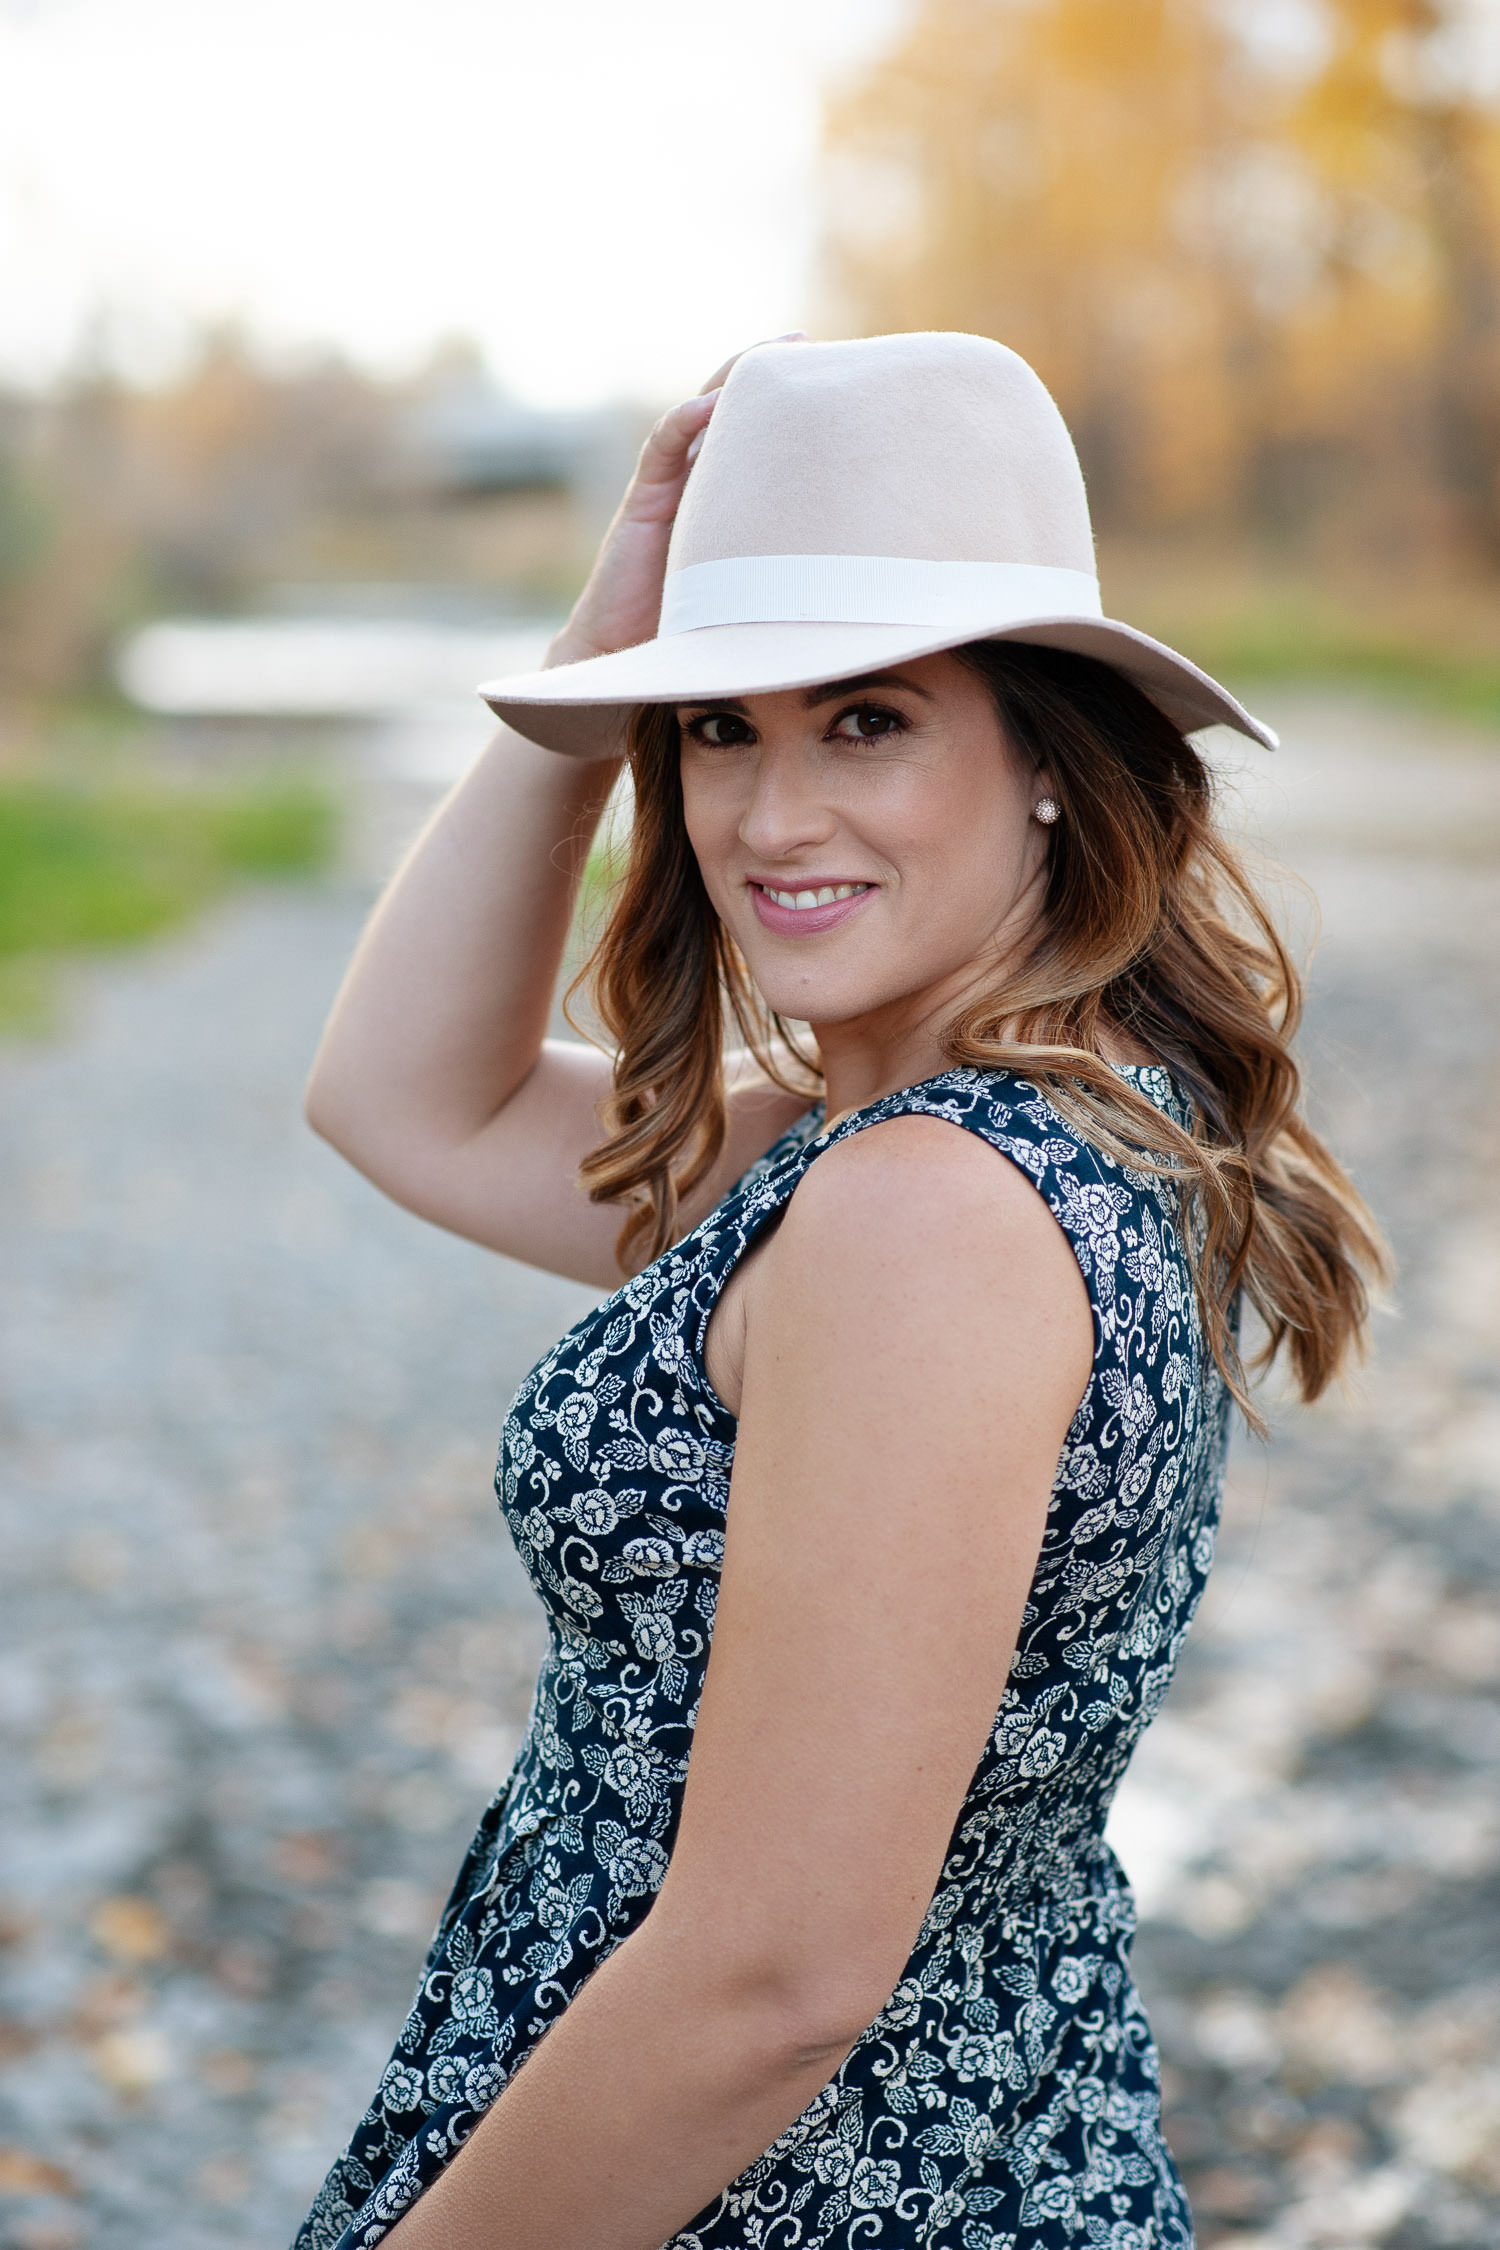 Janie wears a hat during a fall photo shoot in Fish Creek Park captured by Tara Whittaker Photography